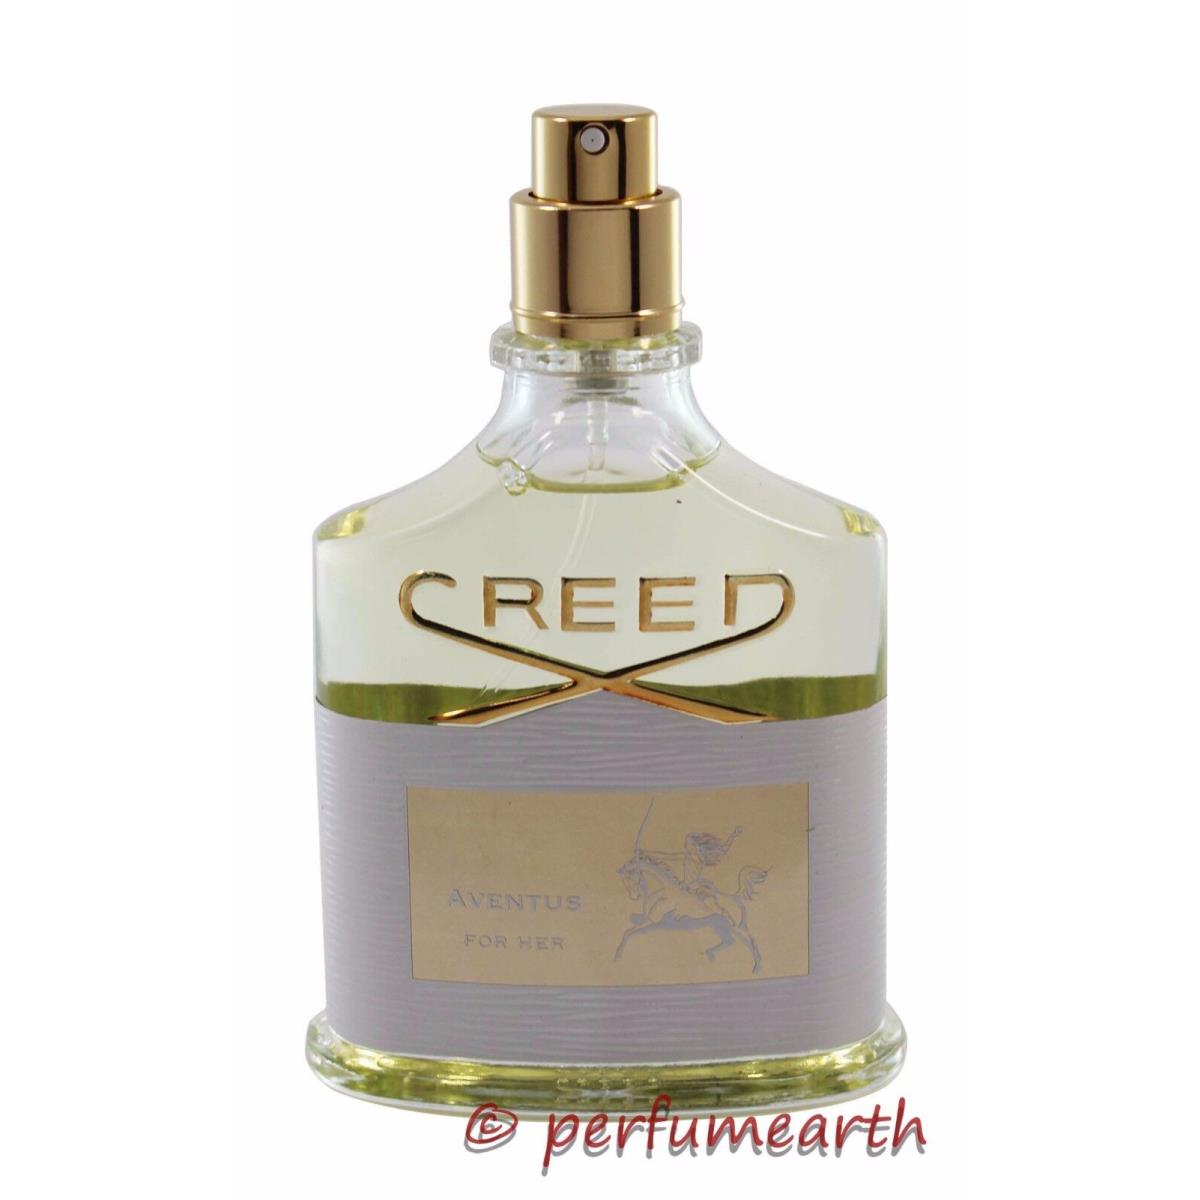 Creed Aventus For Her Edp Spray 2.5 oz/75 ml For Women Same As Picture